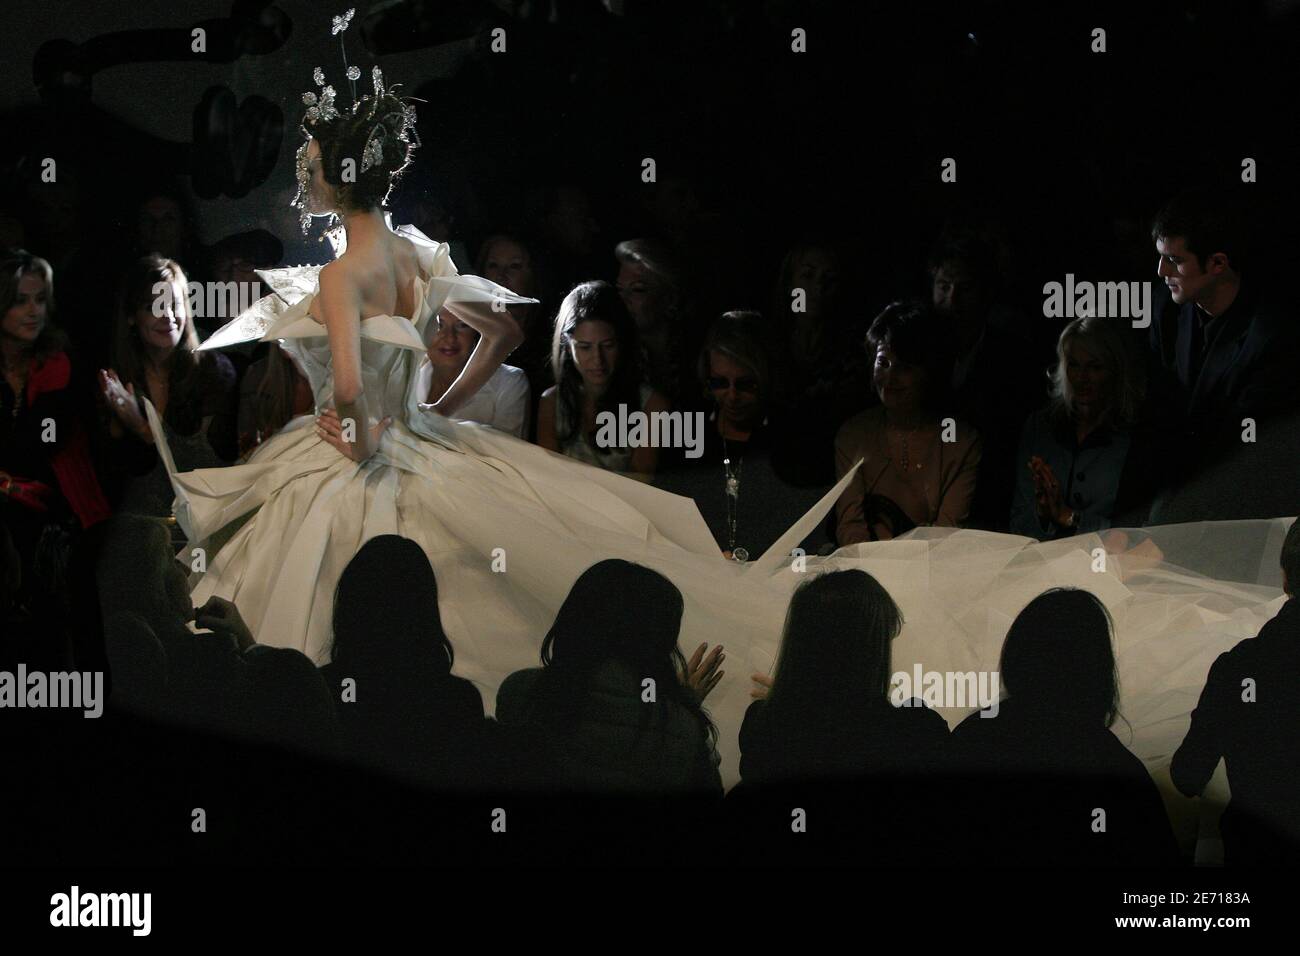 John galliano and models hi-res stock photography and images - Alamy